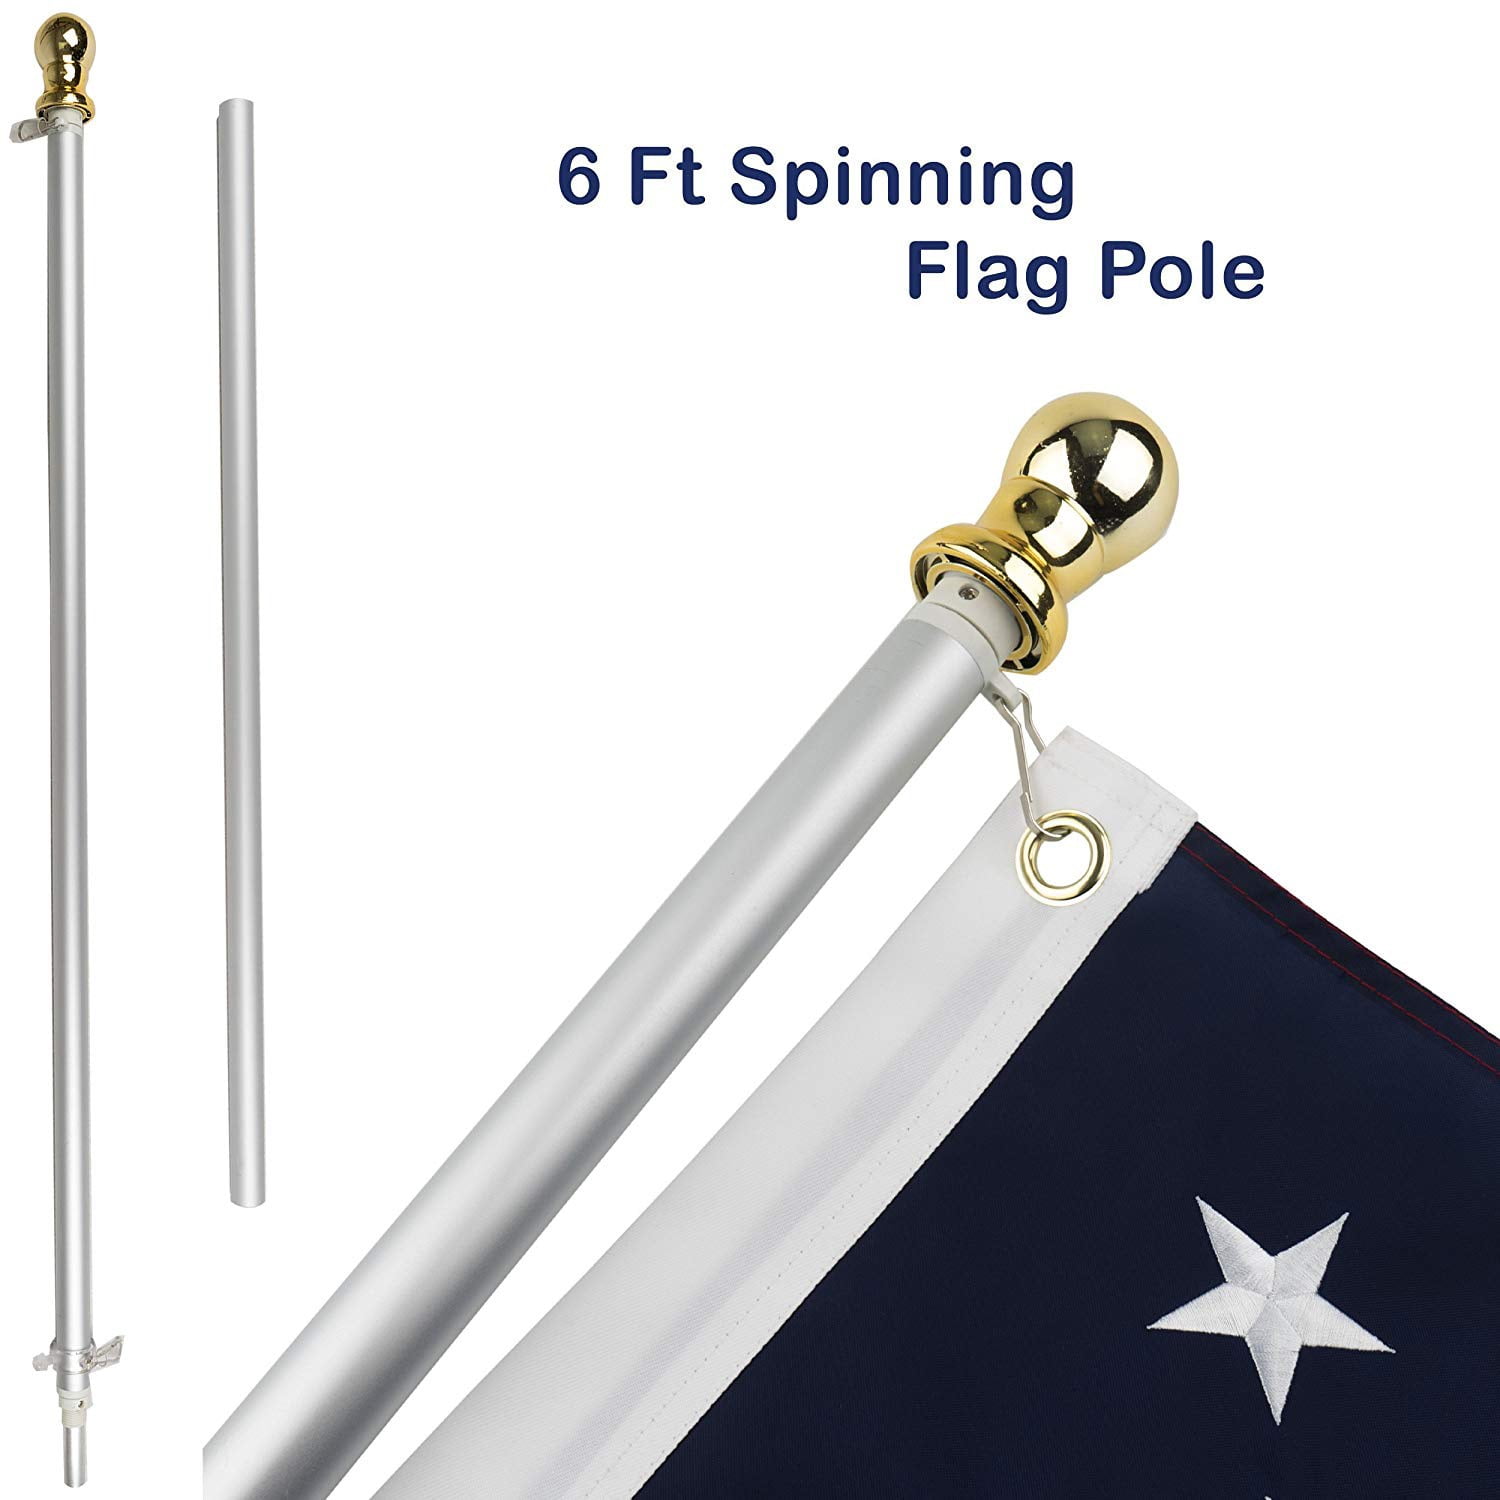 Front Line Flags Flag Pole: 6 Ft Silver Aluminum Flagpole Wind Resistant and Rust Free Silver Wall Mount Flagpole P/N FL6S Spinning and Tangle-Free Heavy Duty 